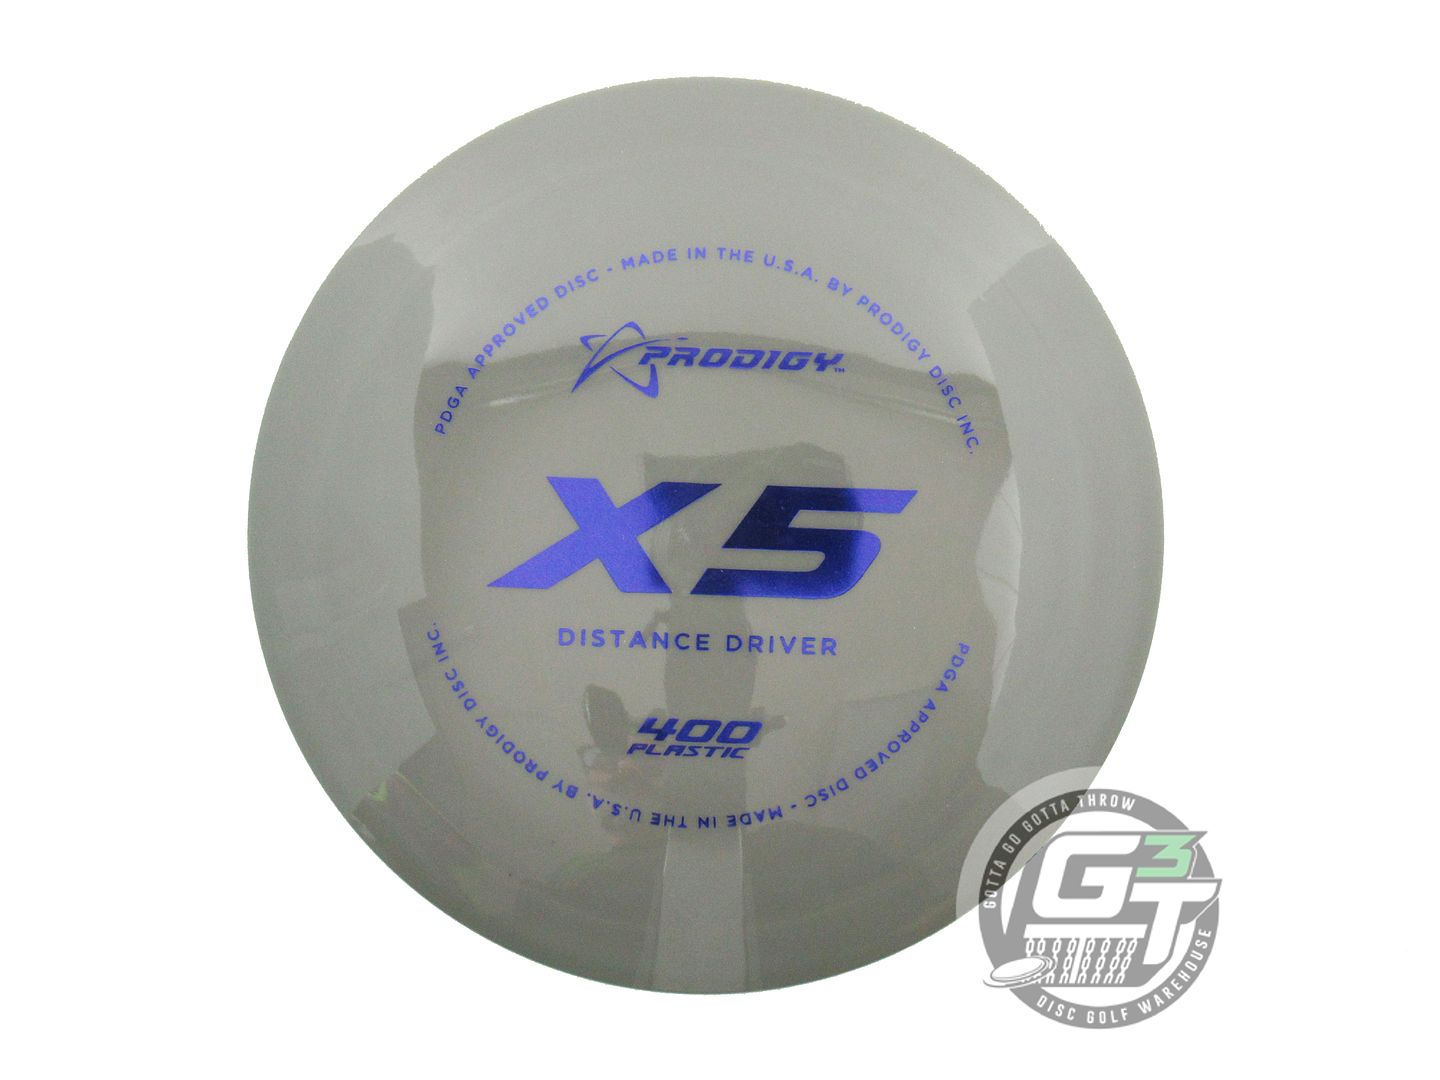 Prodigy 400 Series X5 Distance Driver Golf Disc (Individually Listed)